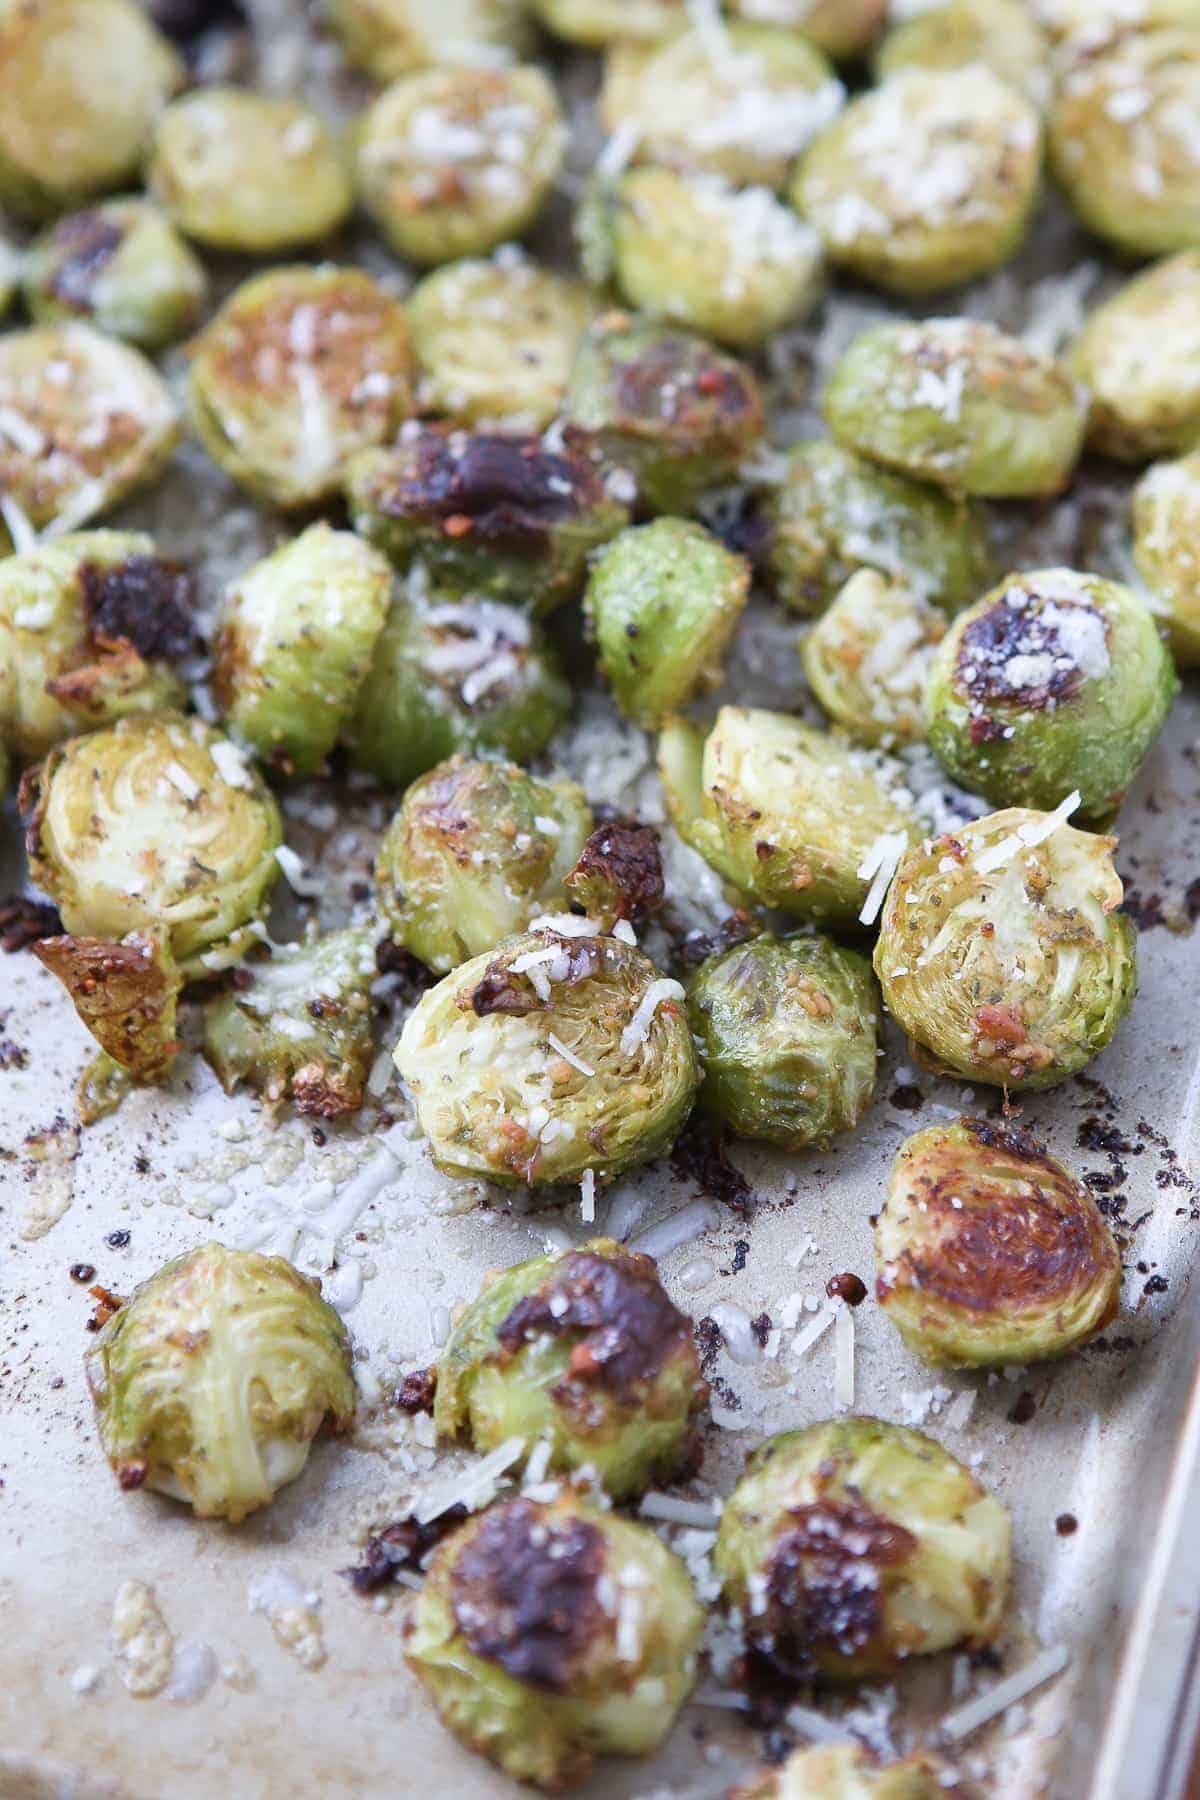 Pesto Roasted Brussels Sprouts Recipe | Aggie's Kitchen